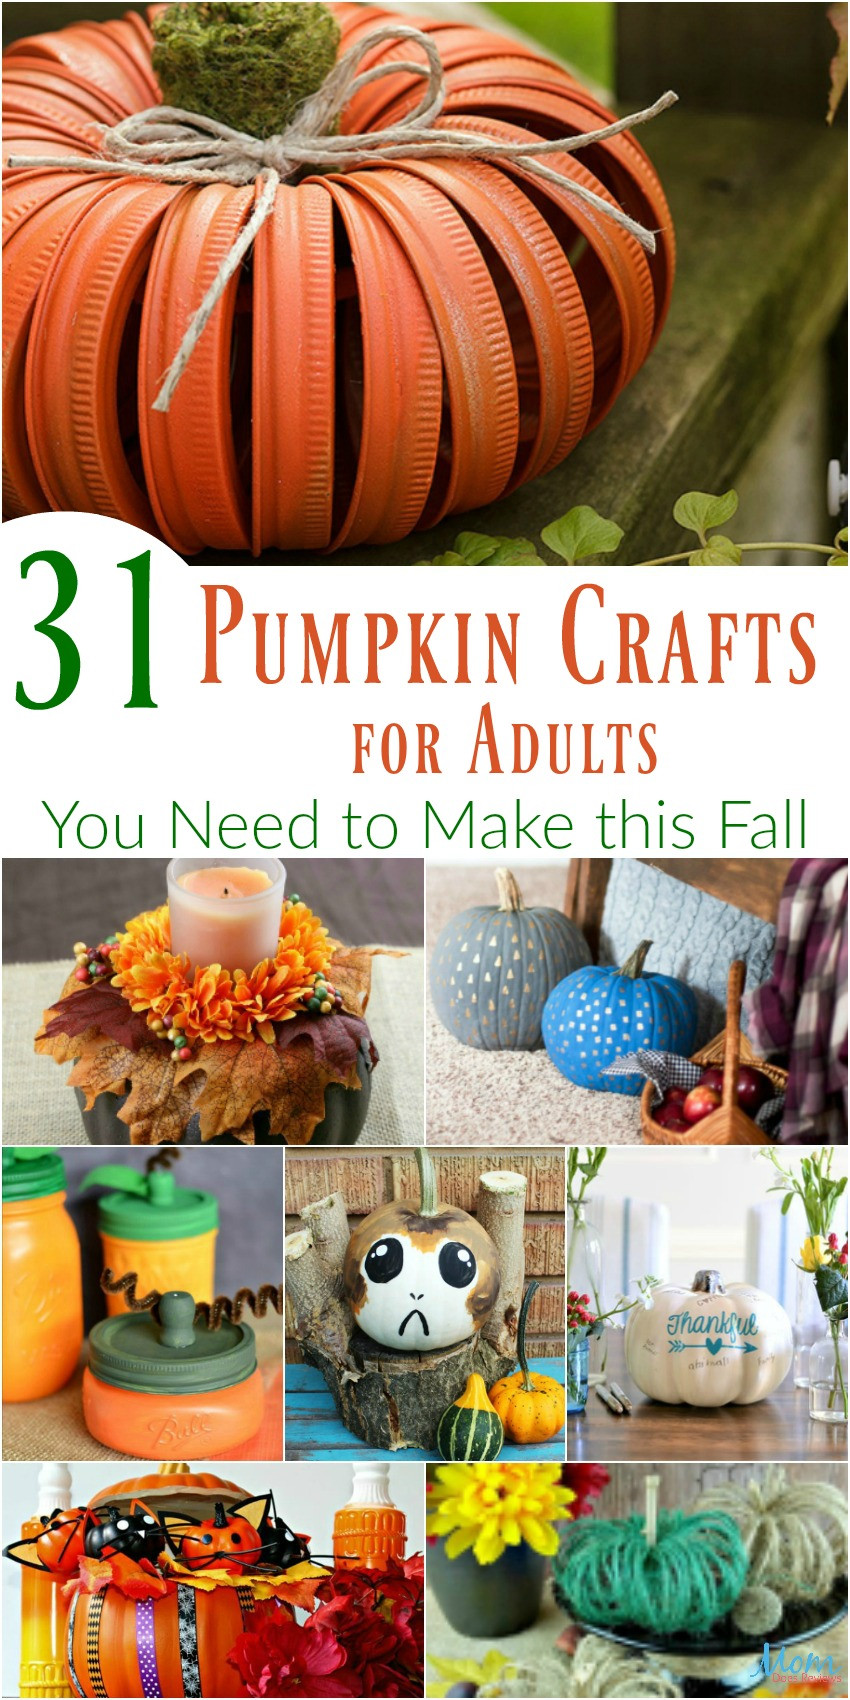 Craft Ideas For Adults
 31 Pumpkin Crafts for Adults You Need to Make this Fall